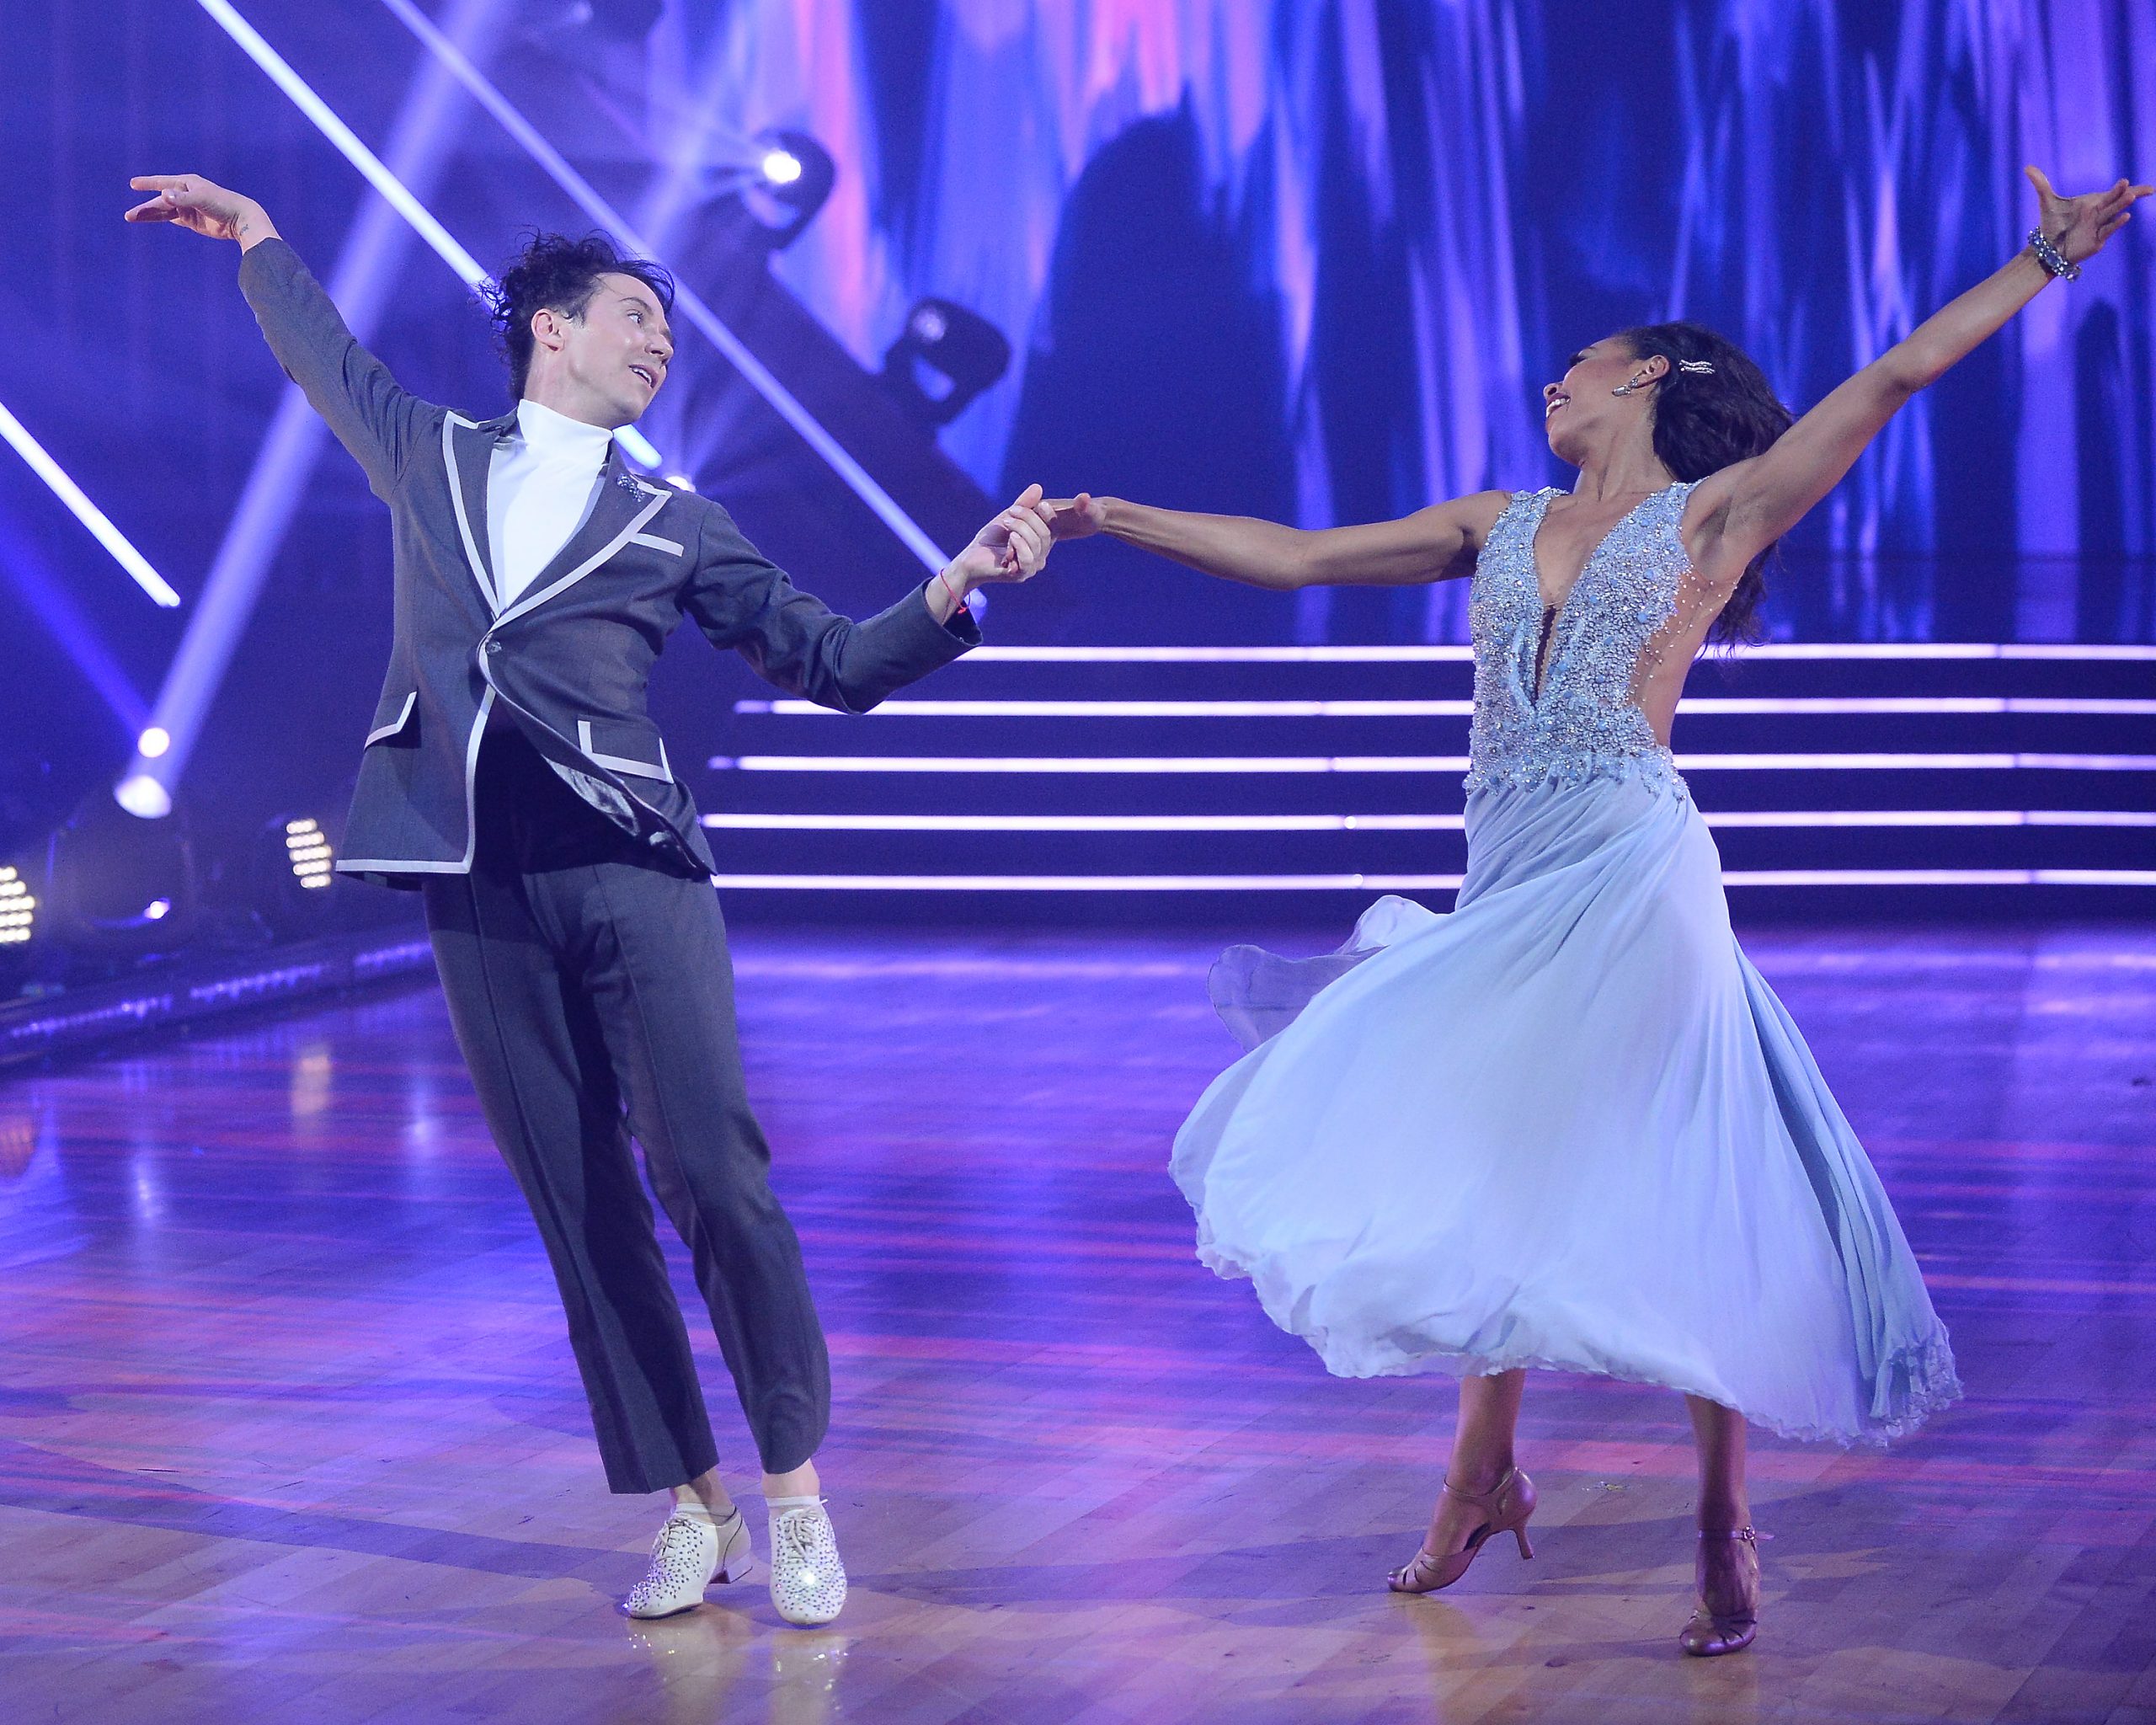 Monday Ratings ABC's 'Dancing With the Stars' Ties NBC's 'The Voice